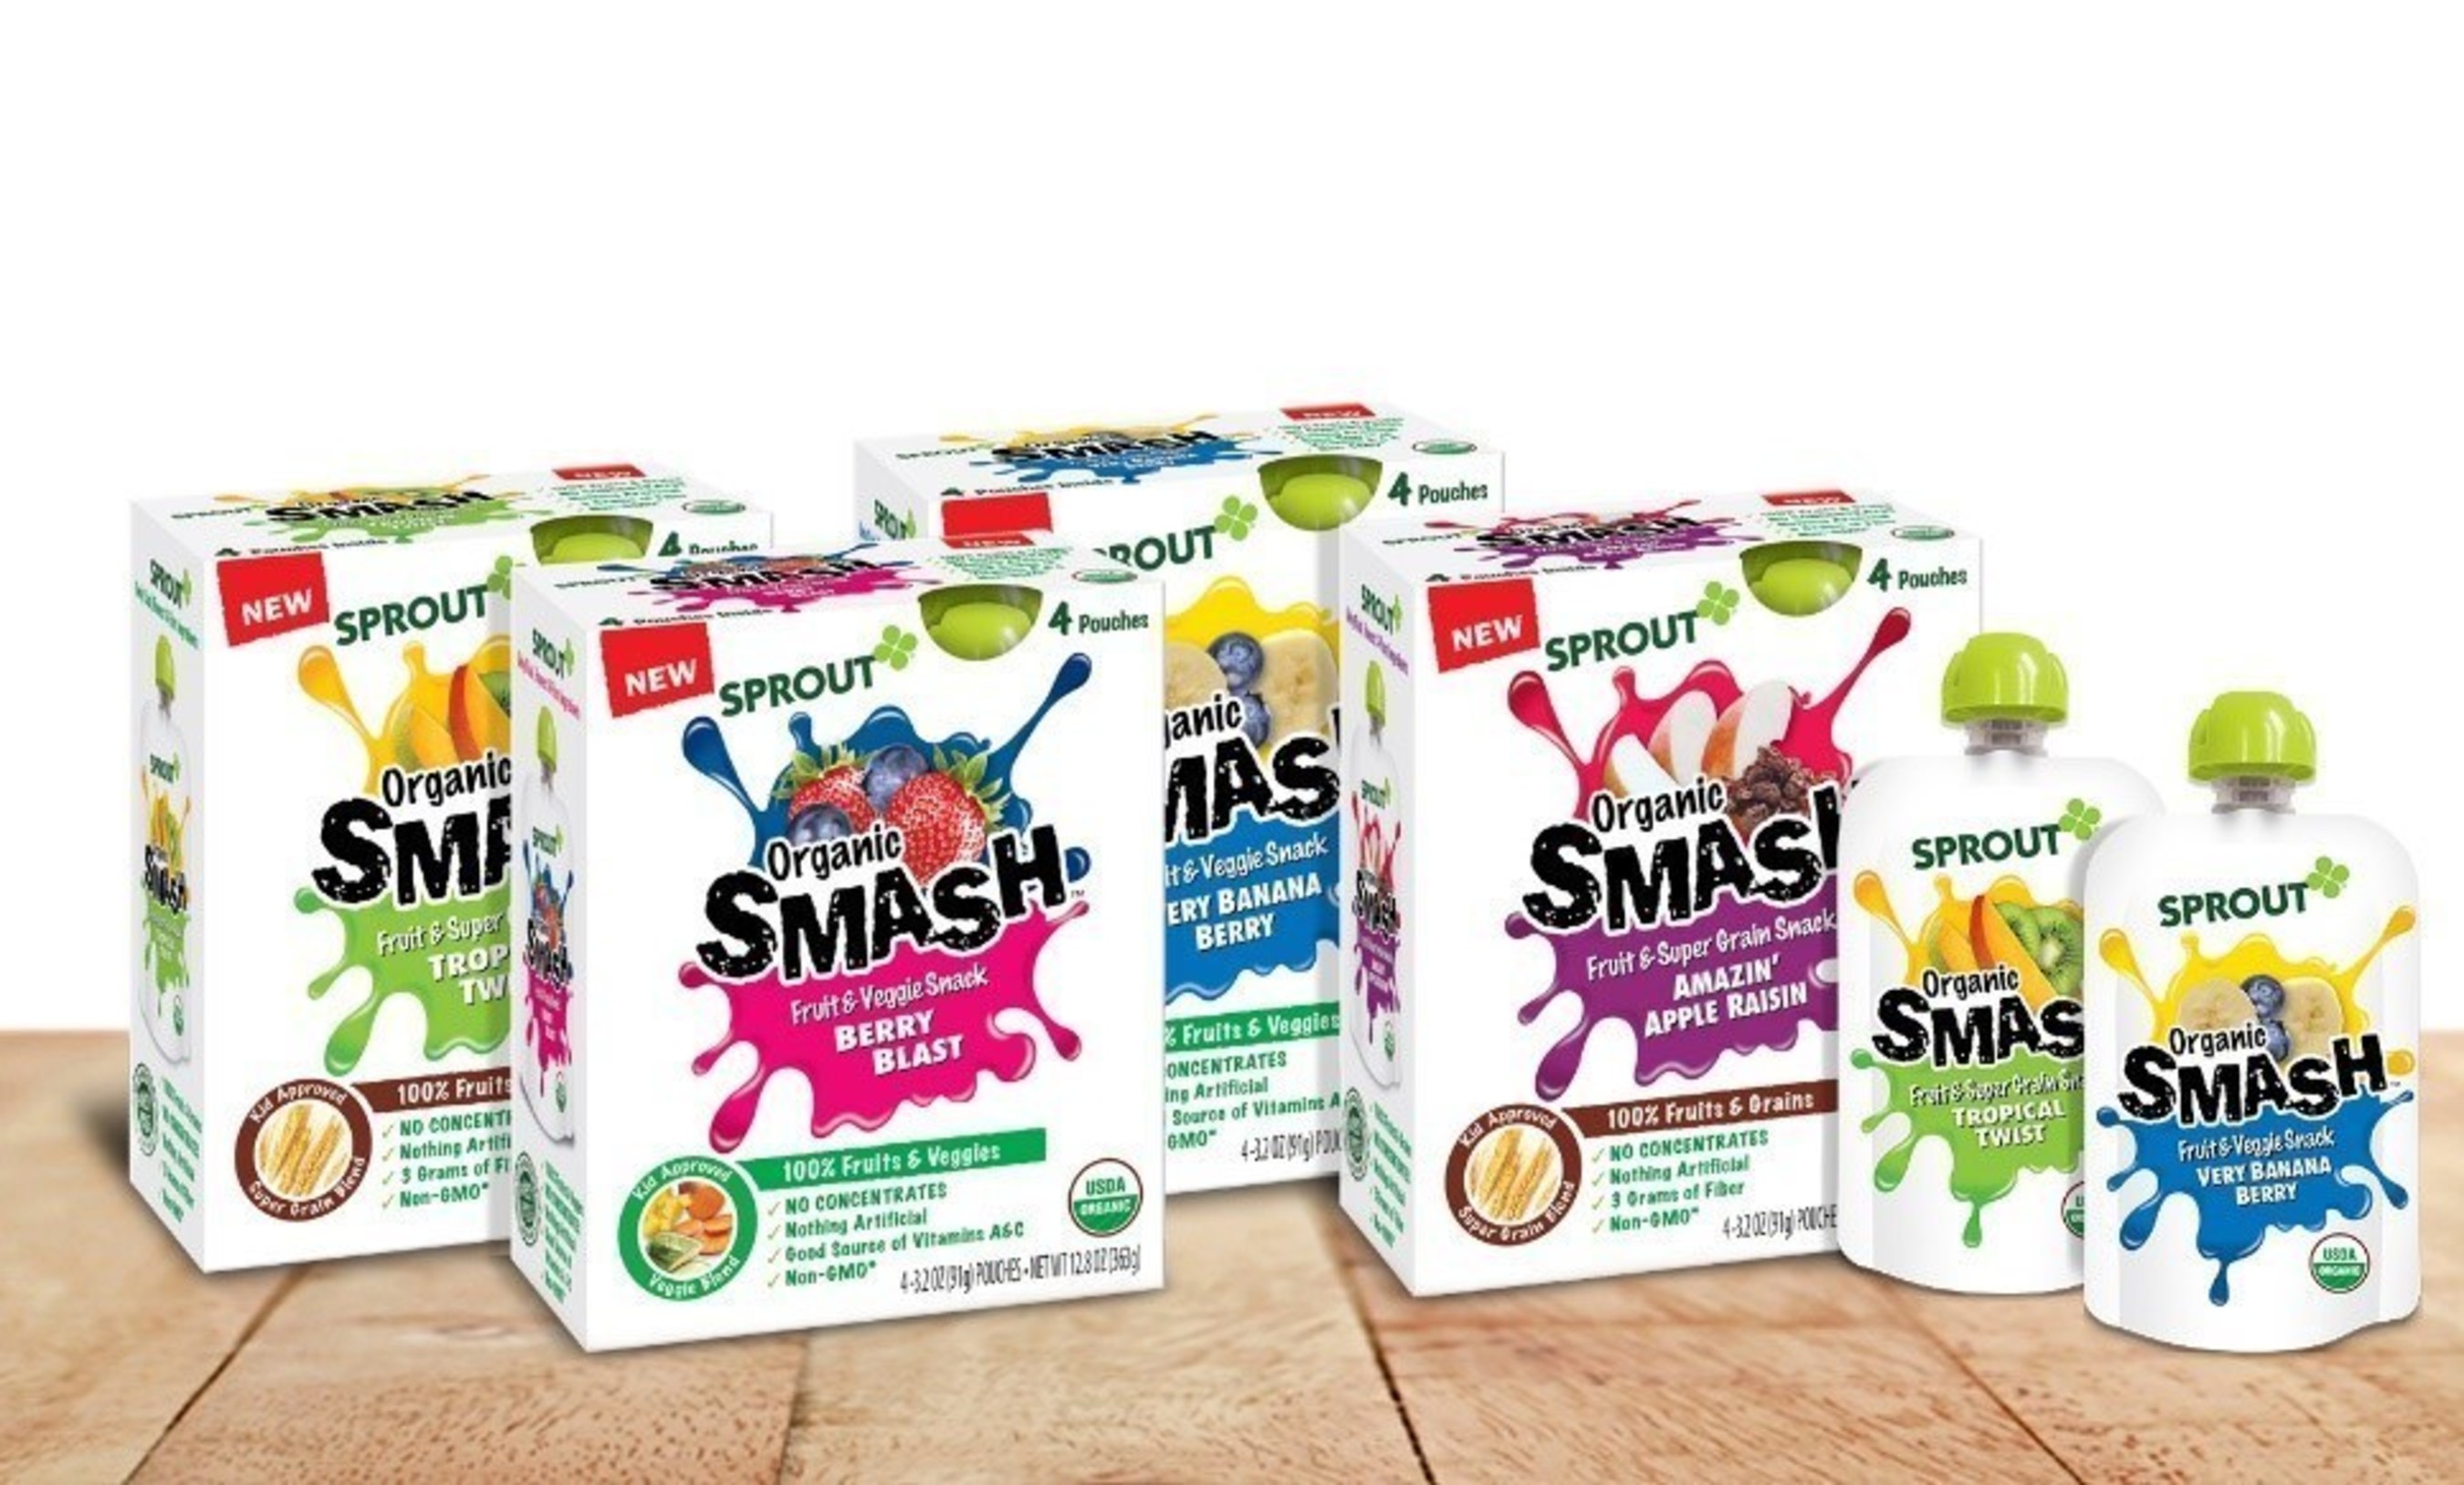 Sprout Organic SMASH(TM) comes in a box of 4 individual 3.2 ounce easy-serve pouches and is available in two unique blends that offer broad flavor variety and nutritional benefits.